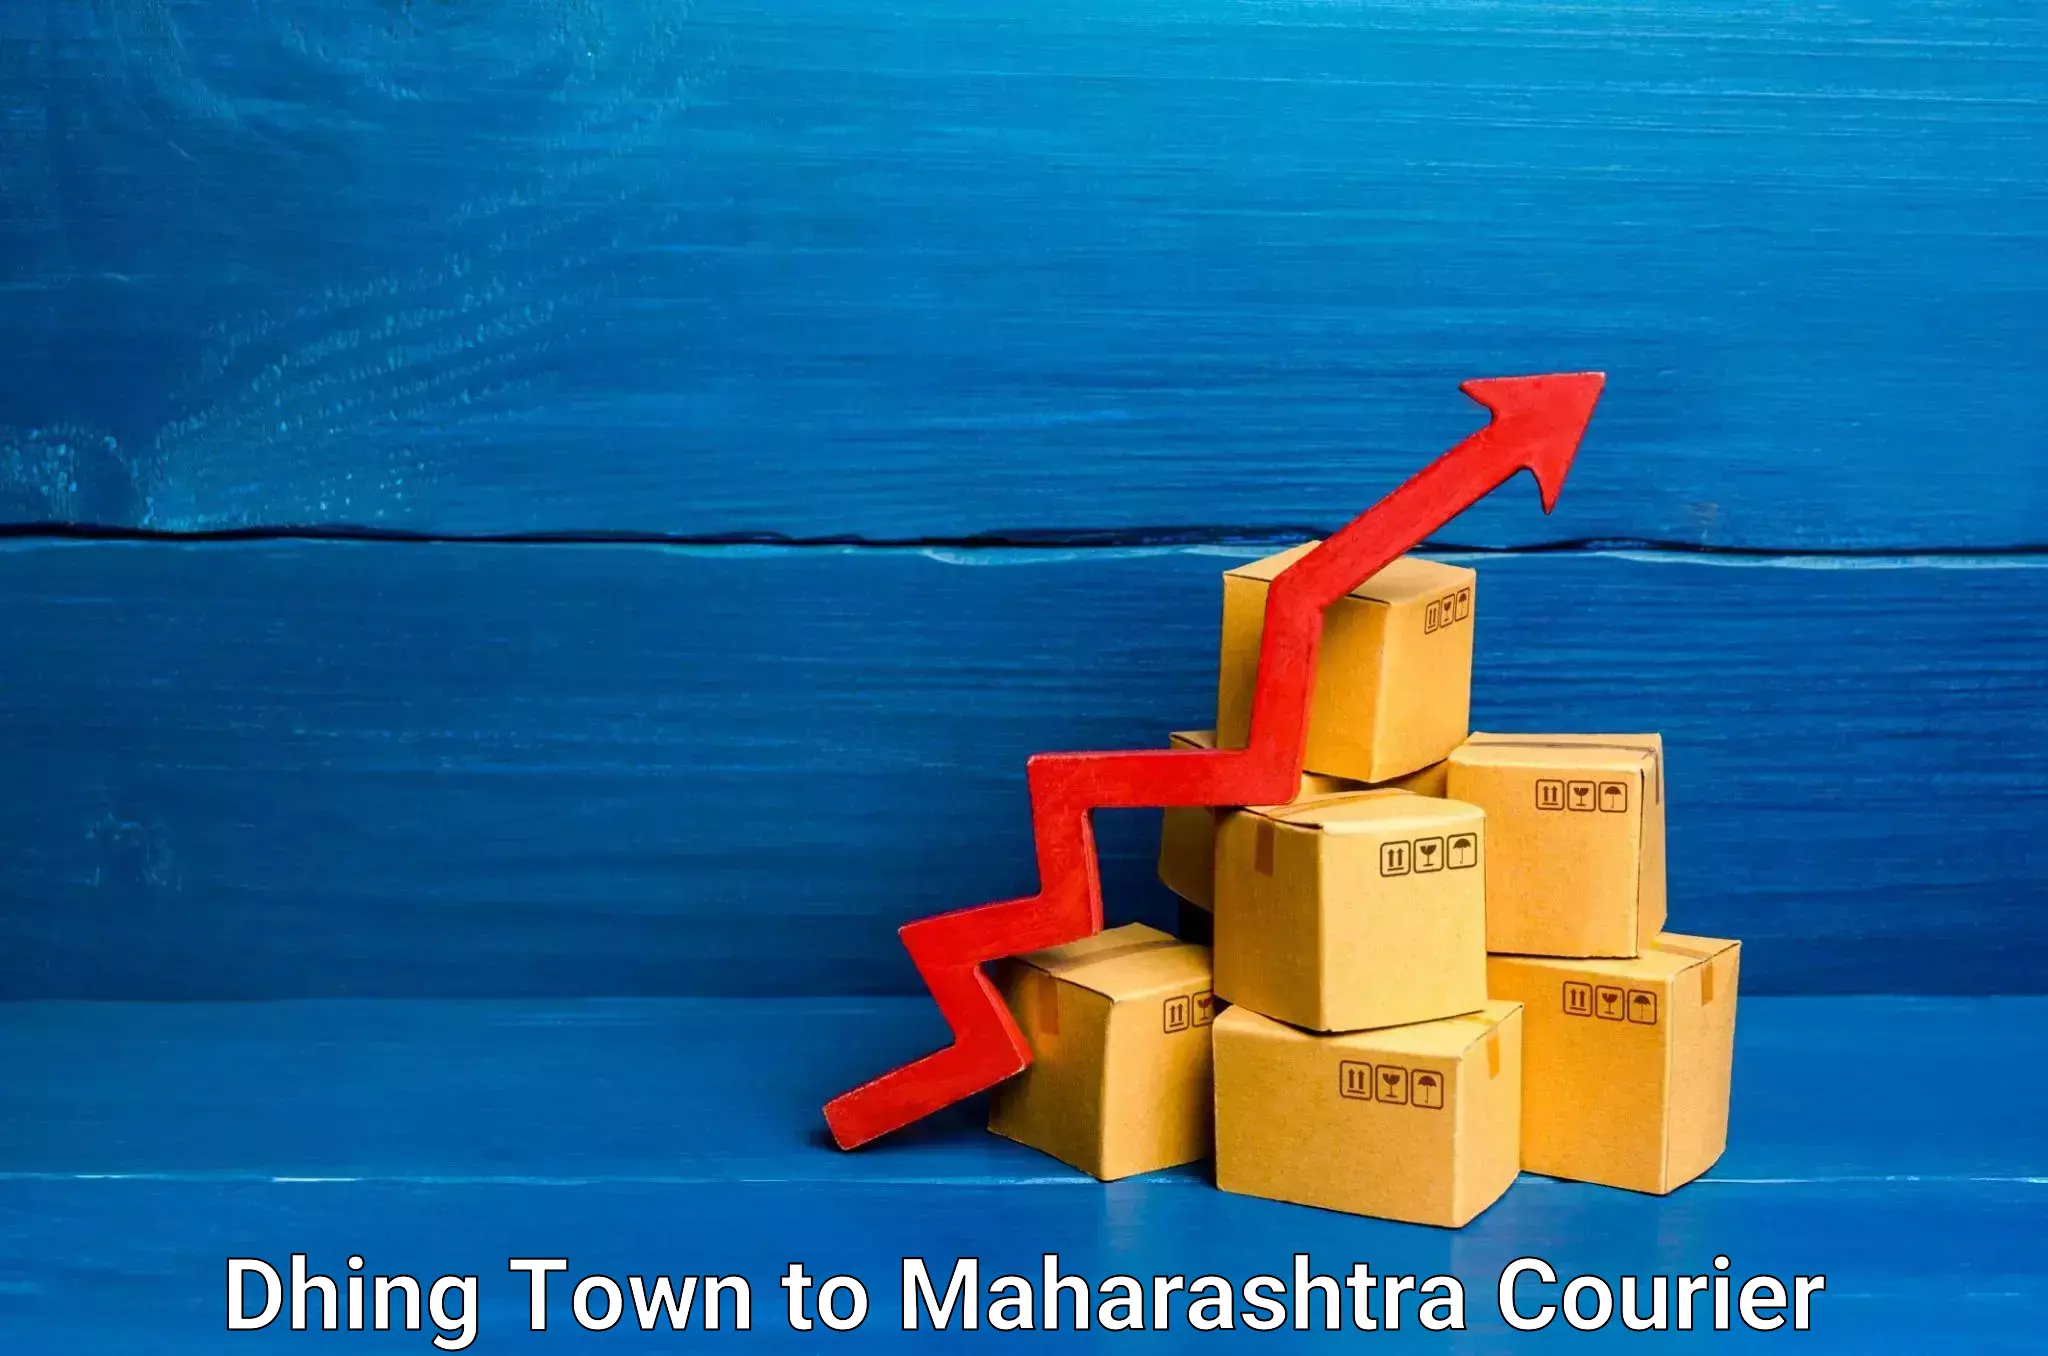 Streamlined delivery processes Dhing Town to Mumbai Port